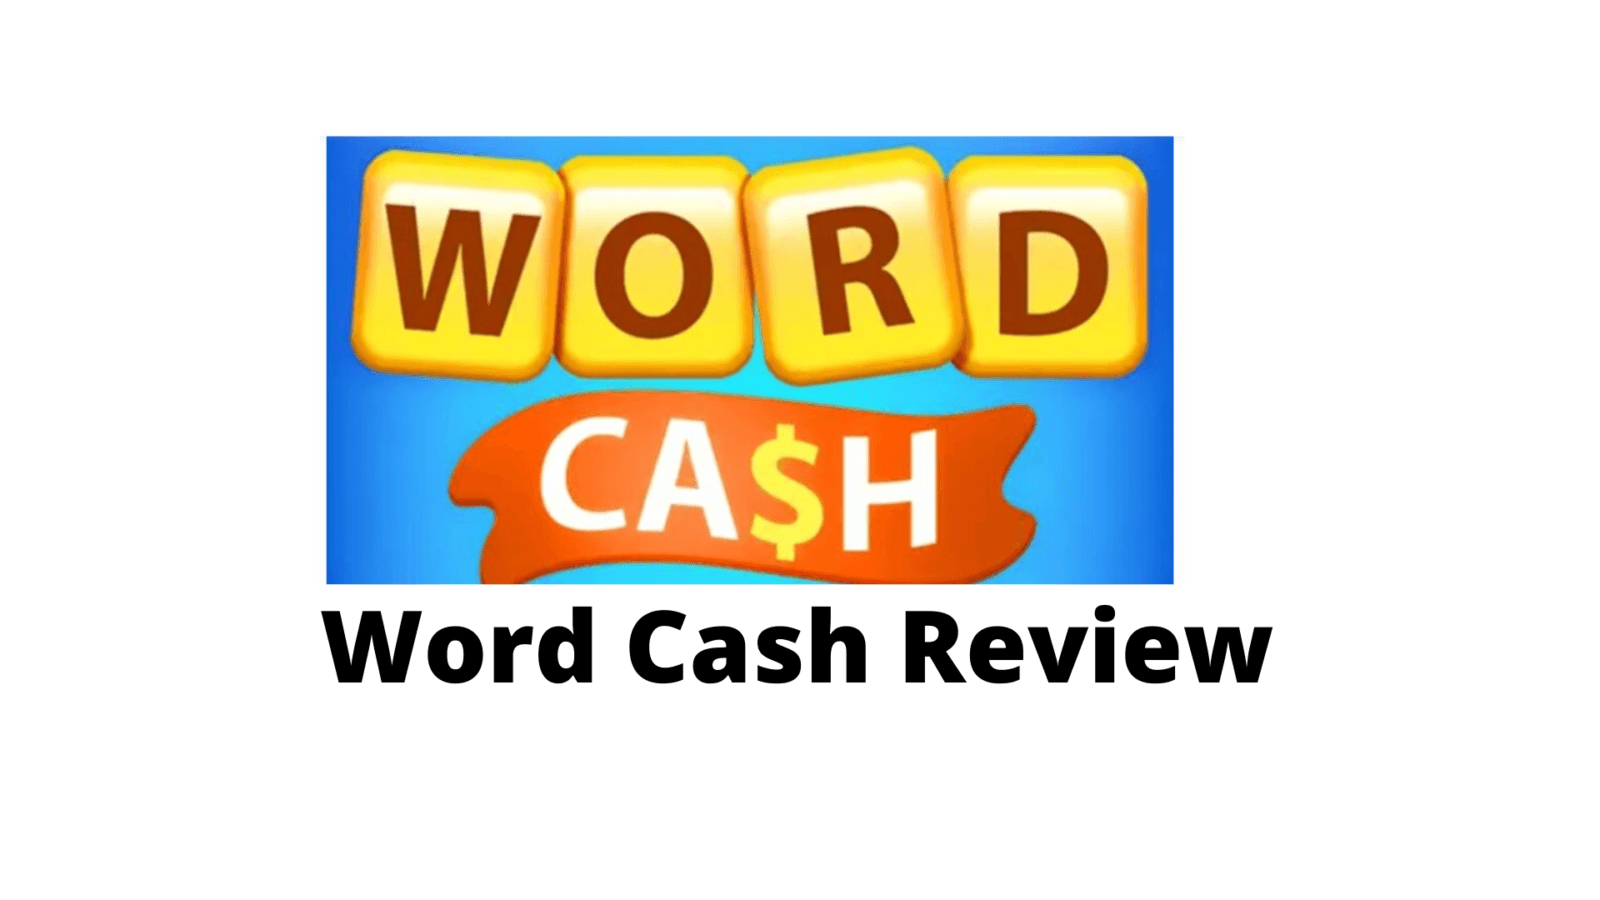 Word Cash Review